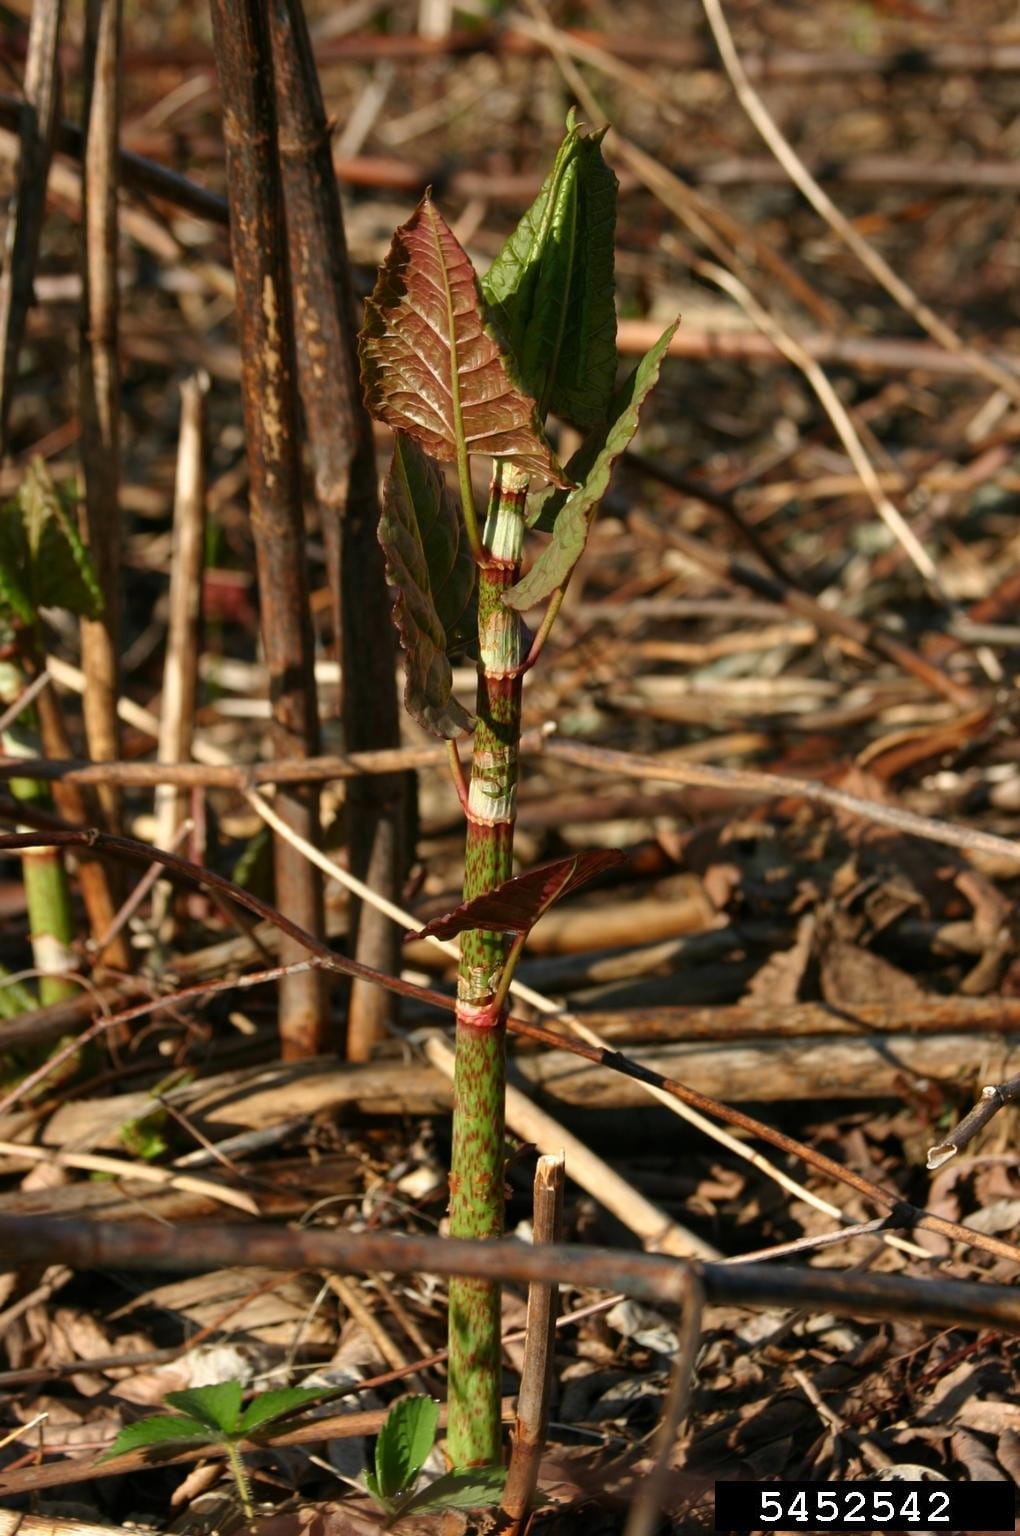 Japanese knotweed emerging from roots. Photo by Leslie J. Mehrhoff of the University of Connecticut, via Bugwood.org.